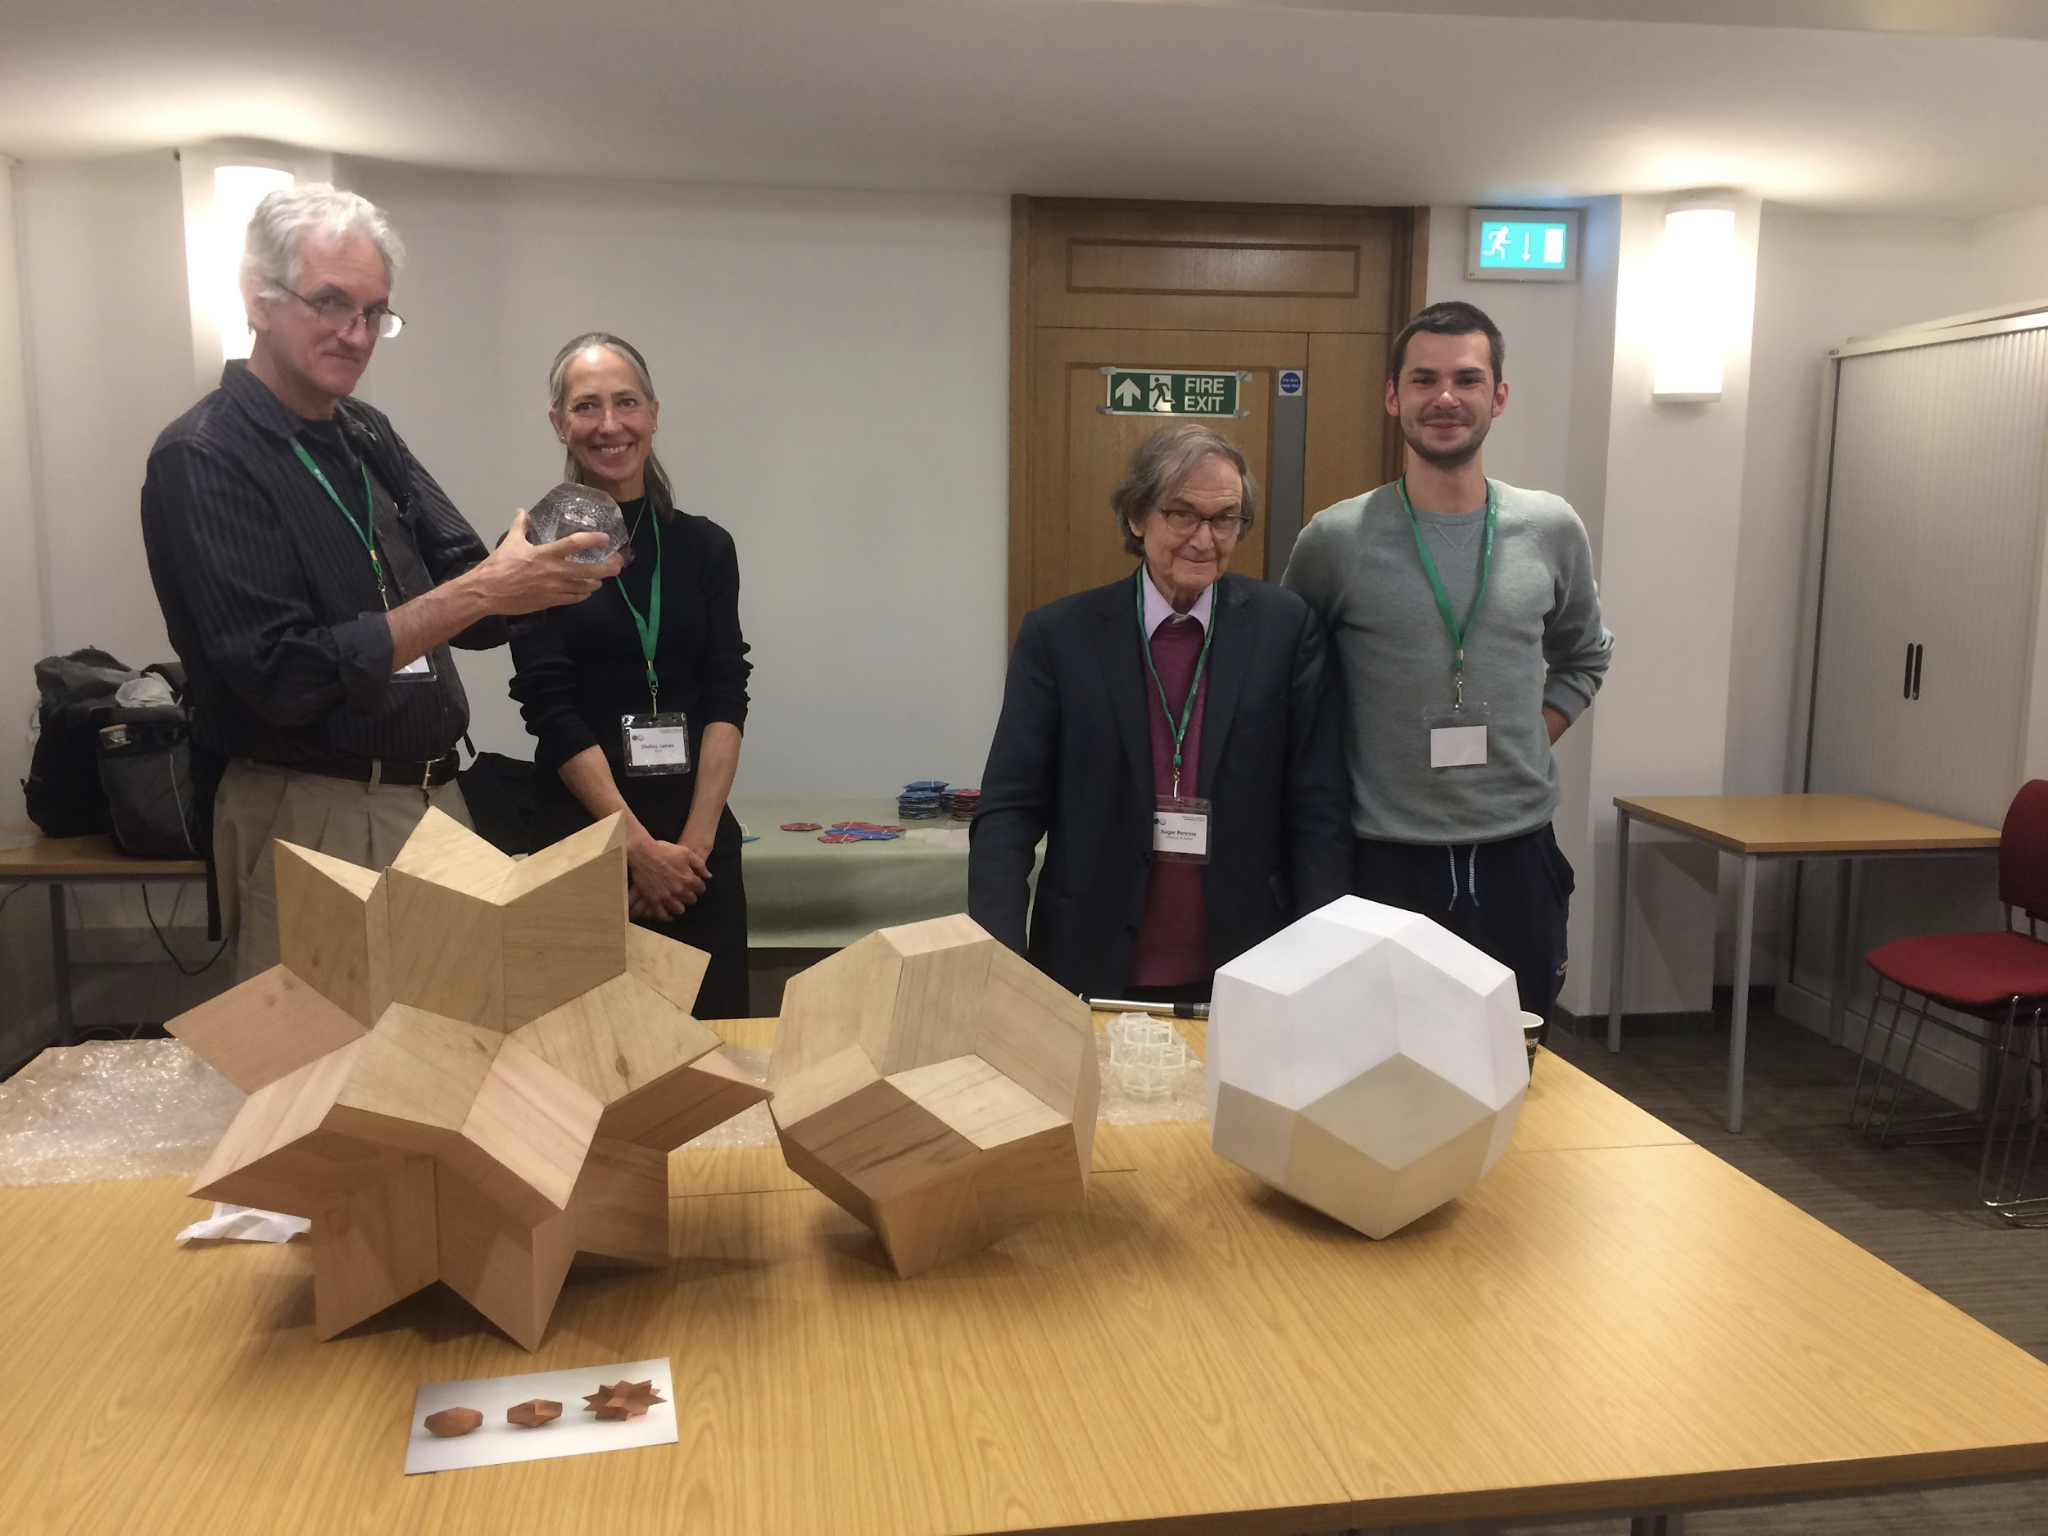 Prof. Joshua Socolar, Dr Shelley James, Sir Roger Penrose and mathematician at ICMS Edinburgh with works by Dominic Hopkinson (2018). Photo: Dominic Hopkinson.